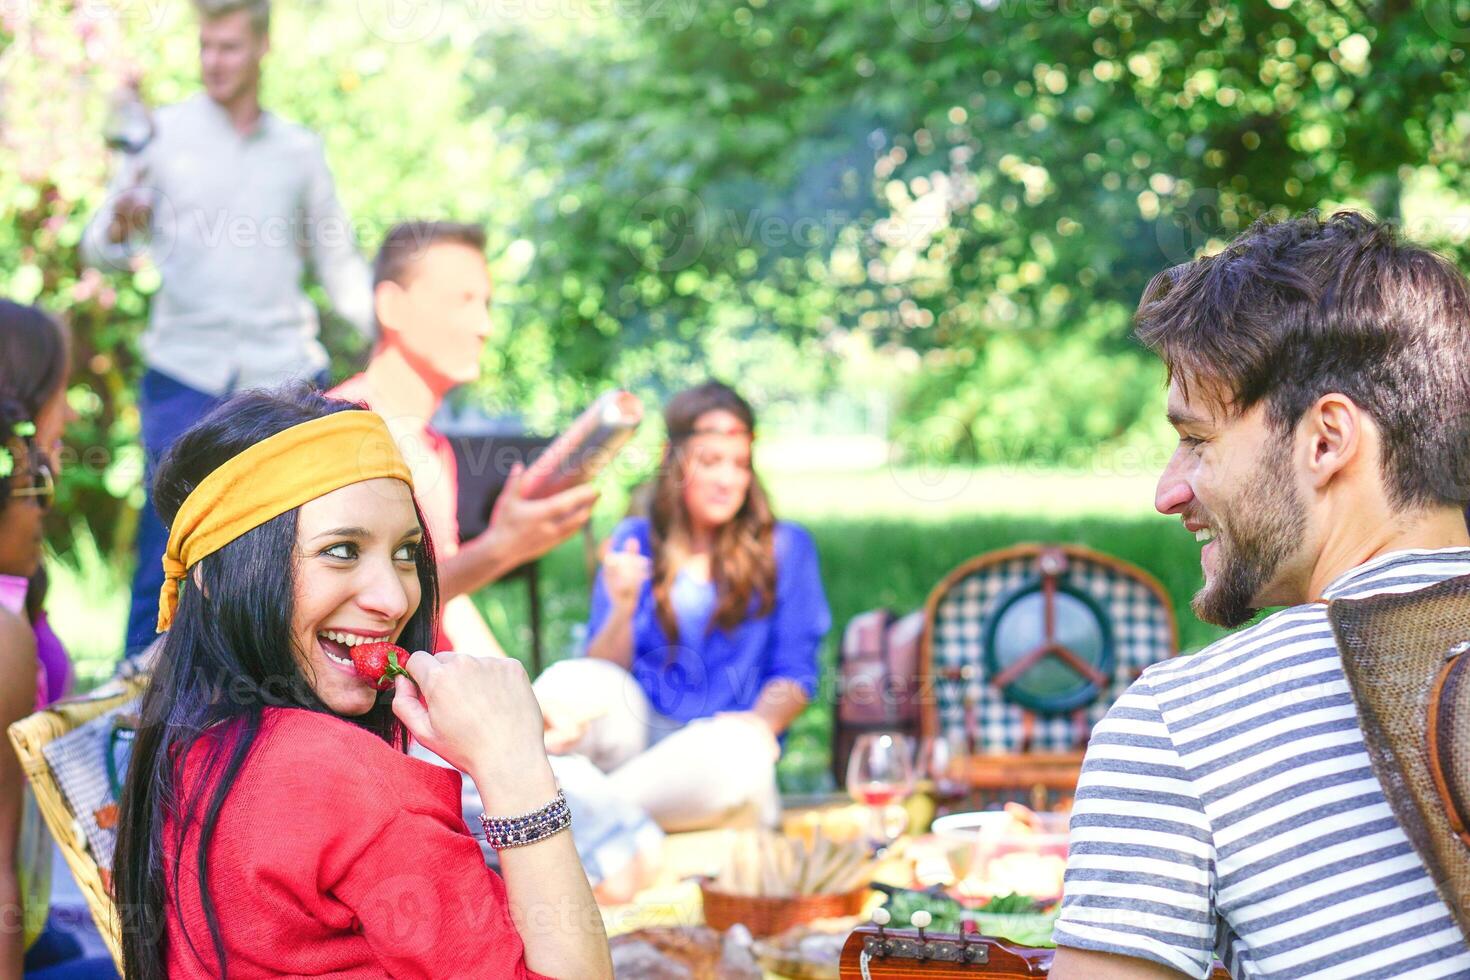 Group of happy friends making a picnic bbq in a park outdoor - Young people having a barbecue party enjoying food and drinks together - Friendship, lifestyle, youth concept - Focus on woman face photo